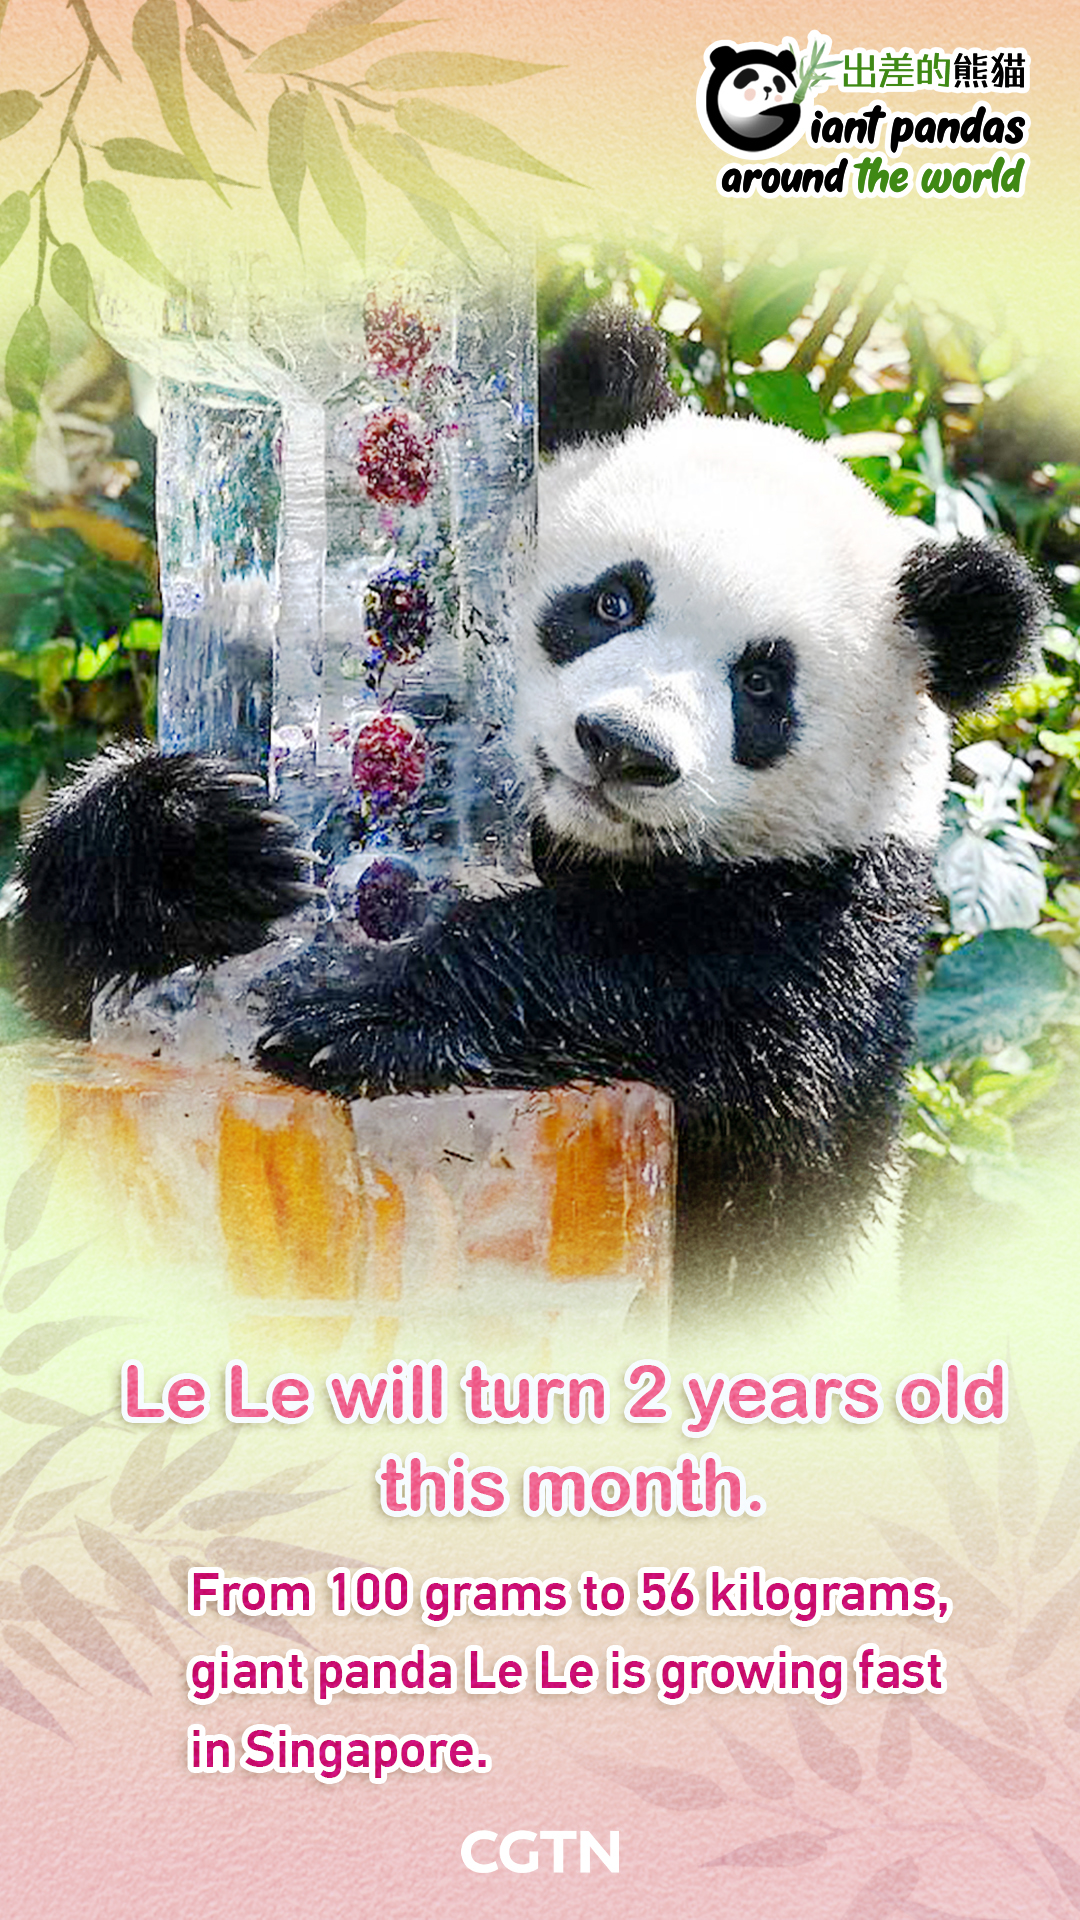 Giant panda Le Le set to turn 2 years old in Singapore